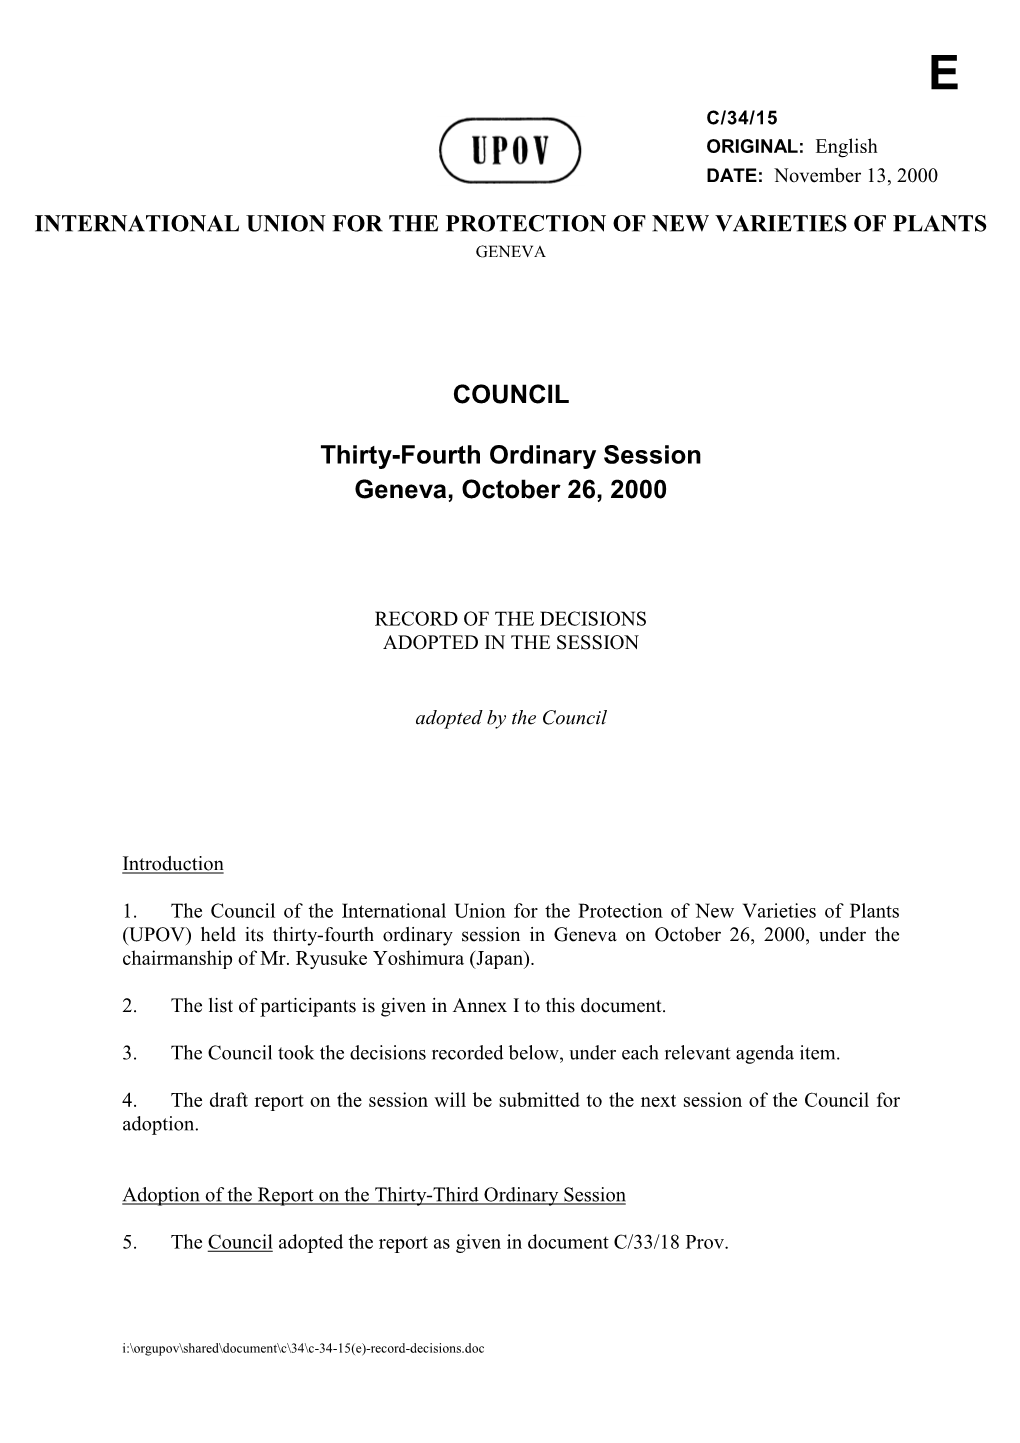 COUNCIL Thirty-Fourth Ordinary Session Geneva, October 26, 2000